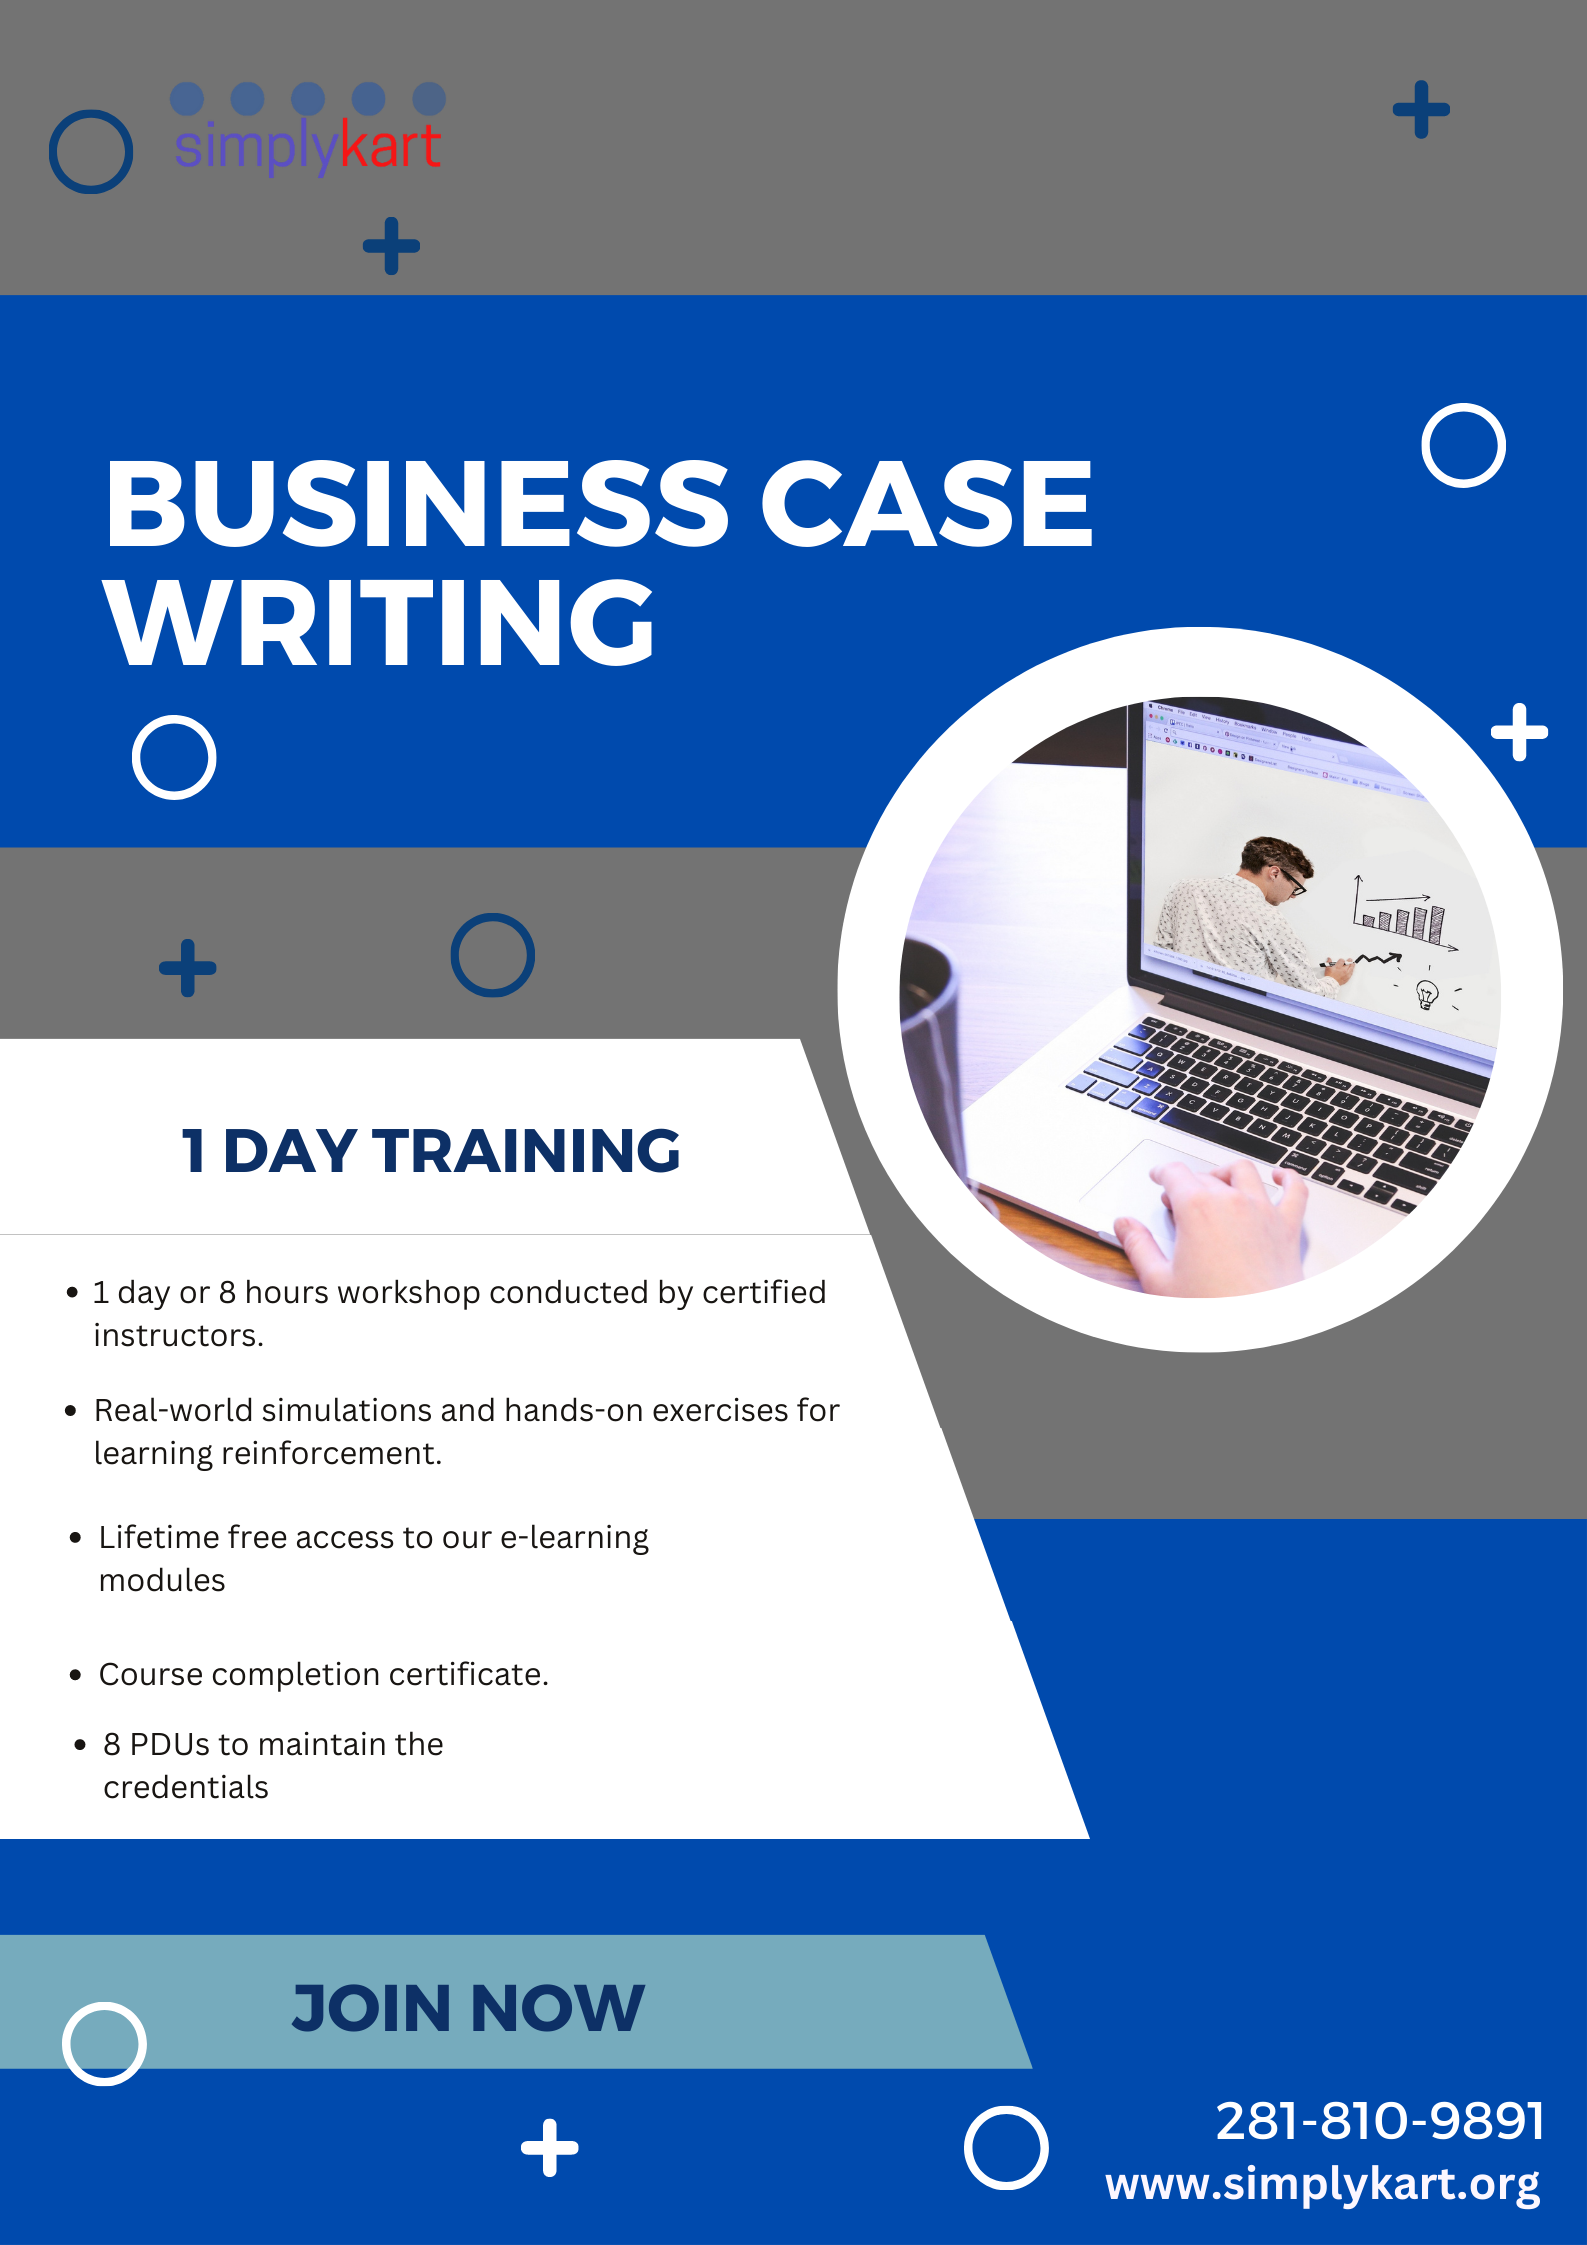 BUSINESS CASE WRITING